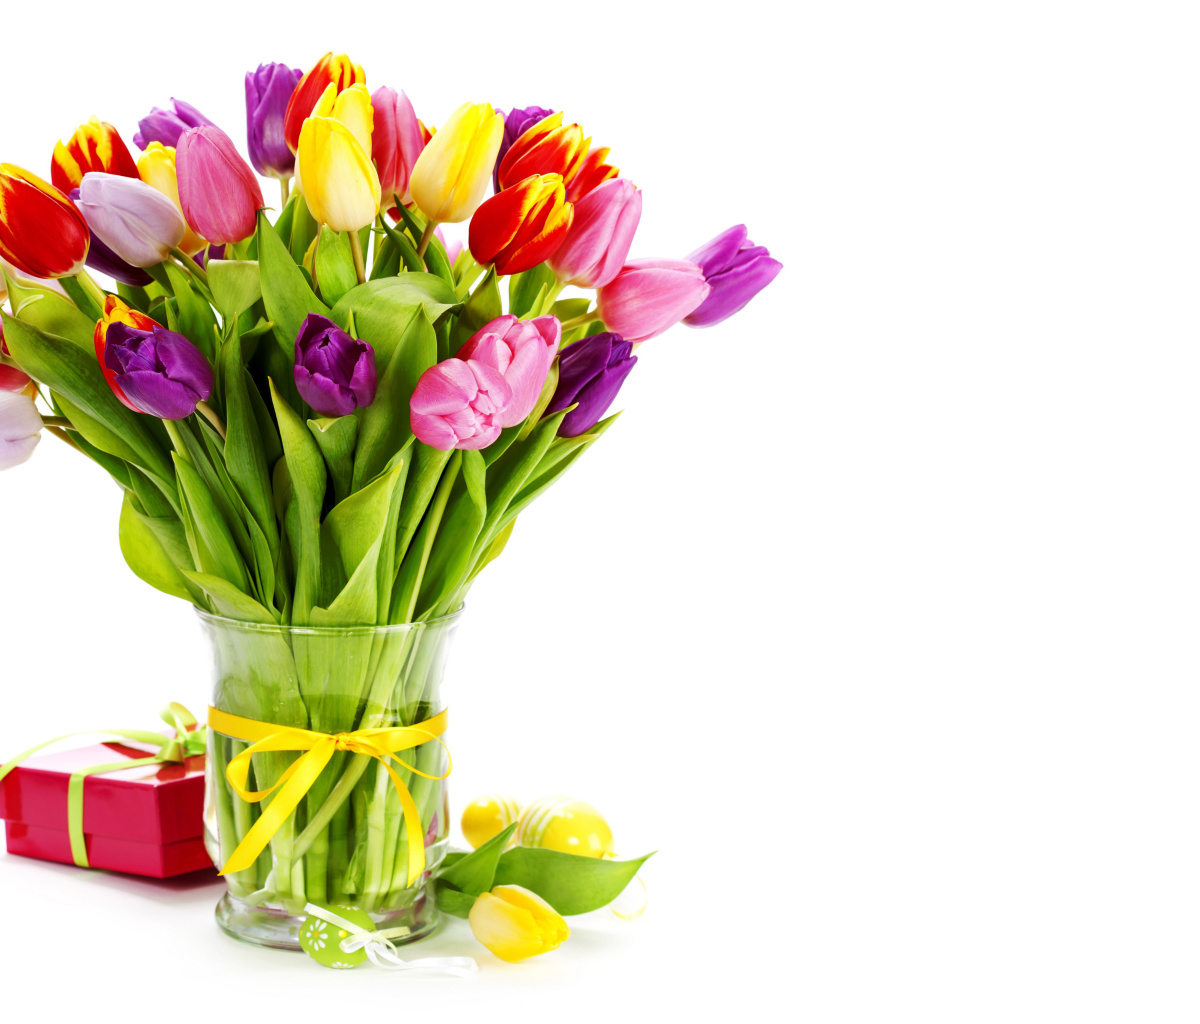 Tulips Bouquet and Gift wallpaper 1200x1024